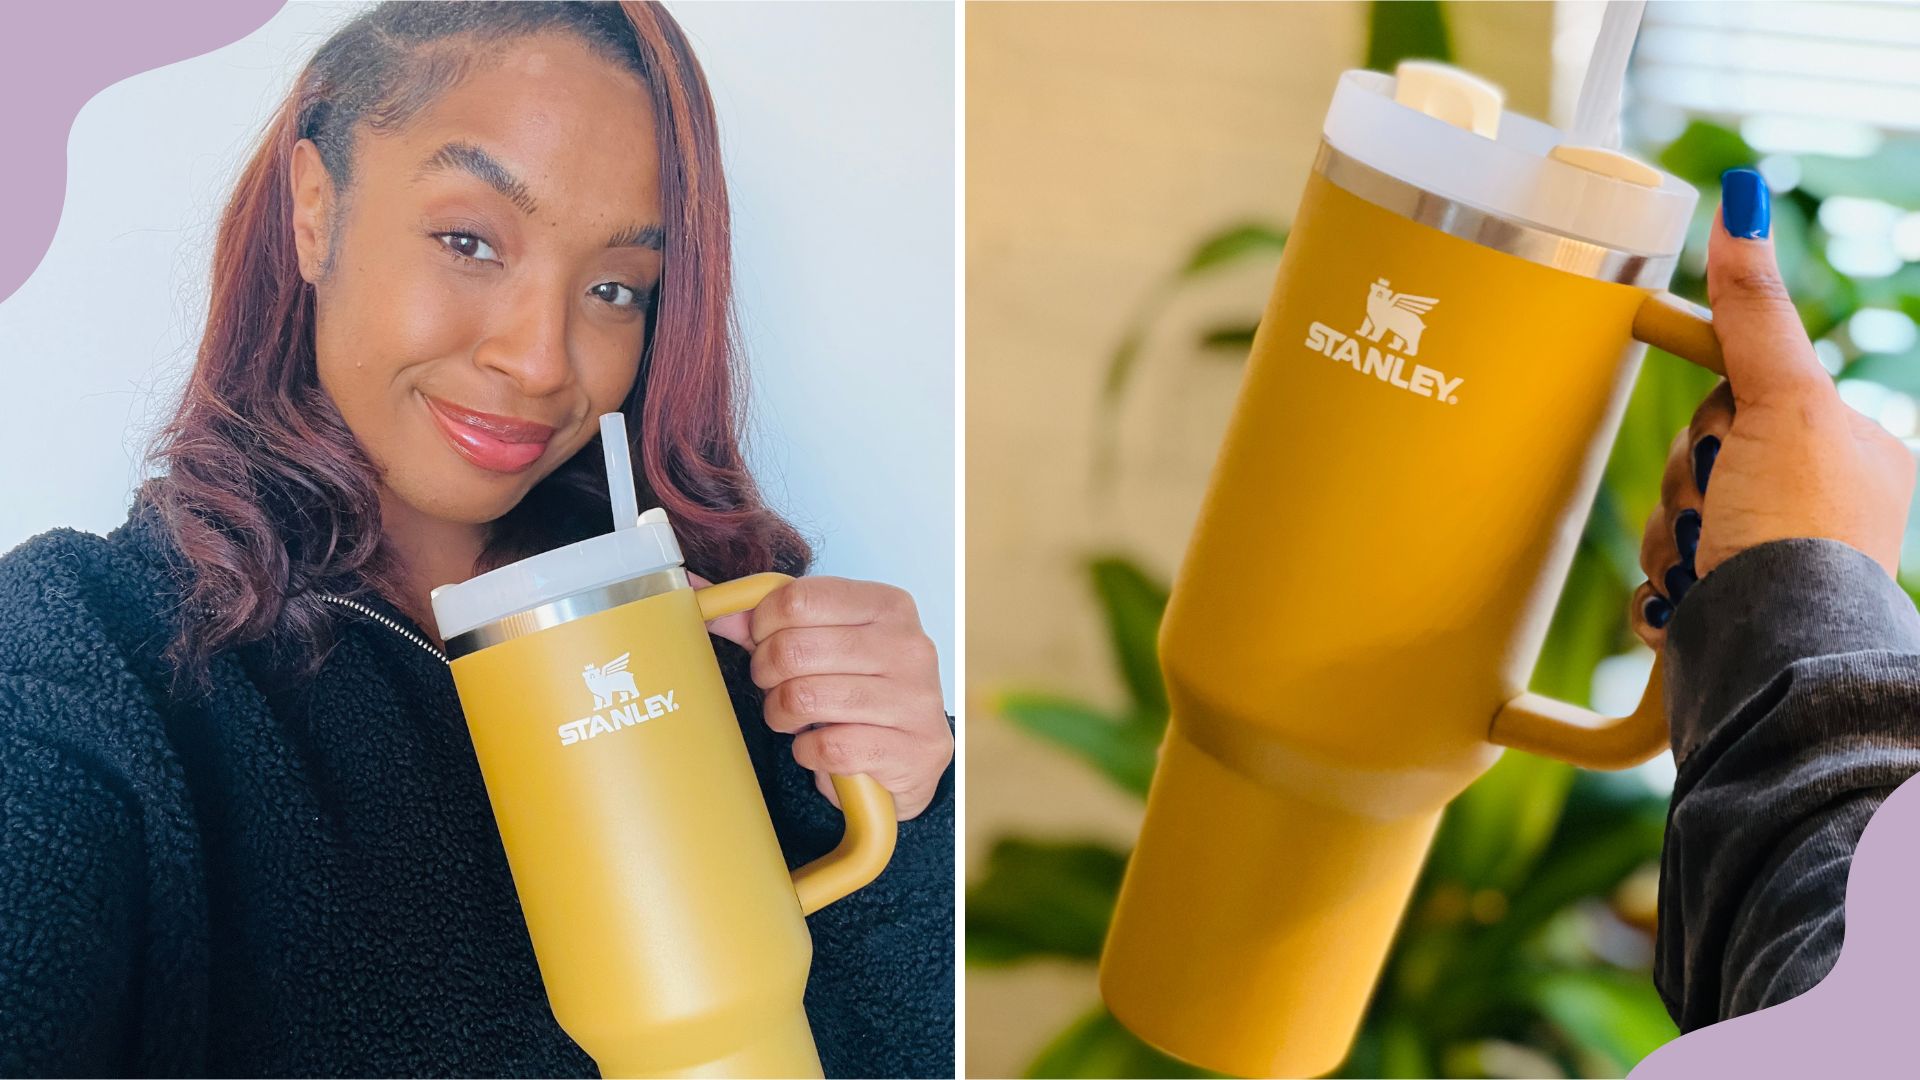 Stanley Quencher Tumbler review: We put the Tiktok favorite to the test